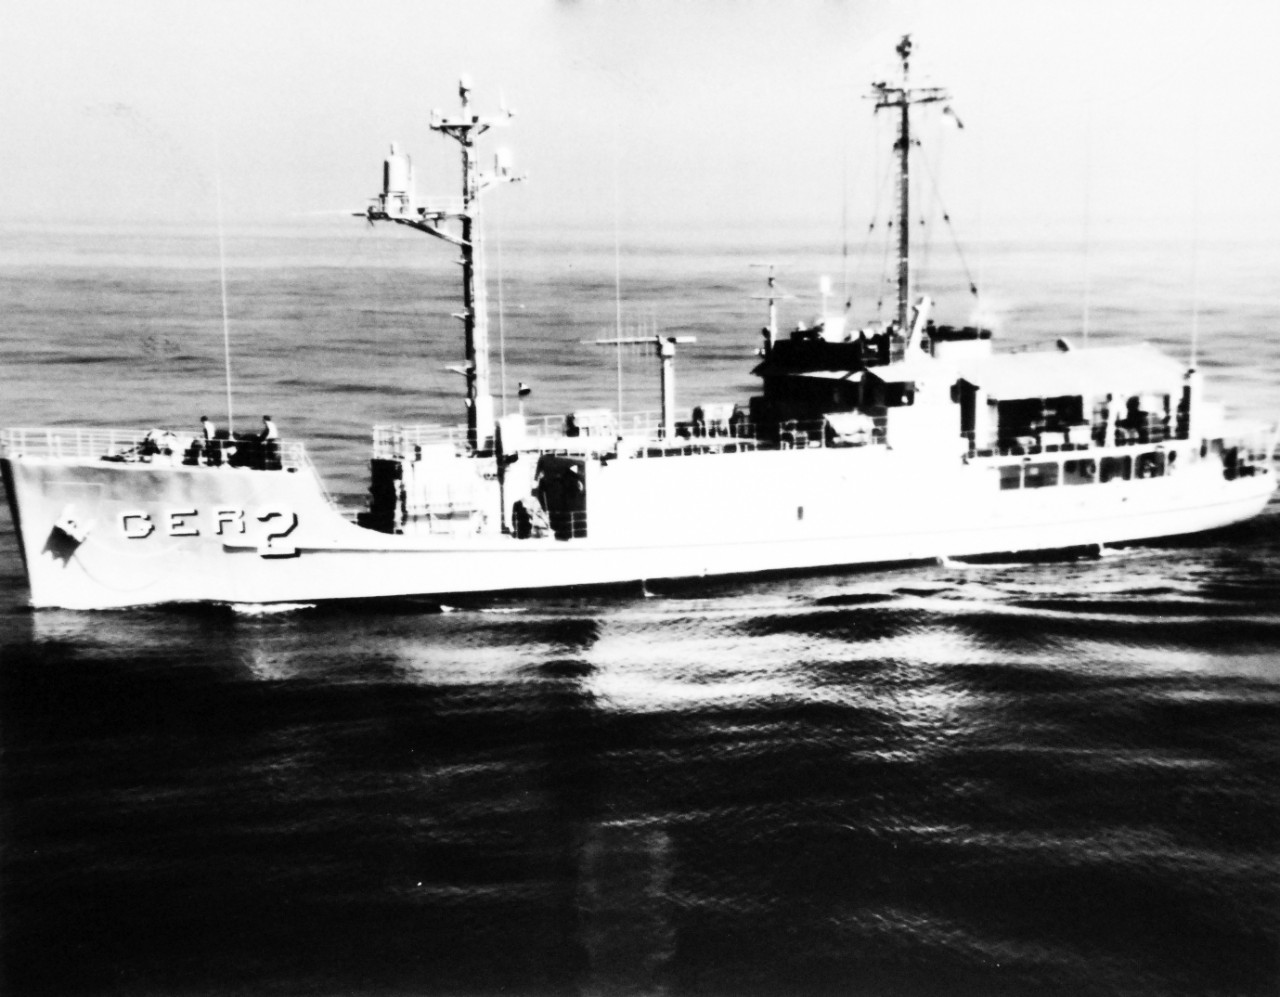 428-GX-USN-1129208:  USS Pueblo (AGER-2), 1967.    The environmental research ship underway off the coast of San Diego, California.  Photographed by PHCS J.M. Larh, October 19, 1967.  Official U.S. Navy Photograph, now in the collections of the National Archives.  Image is also held in the NHHC Photograph Collection.   (2015/05/23).   